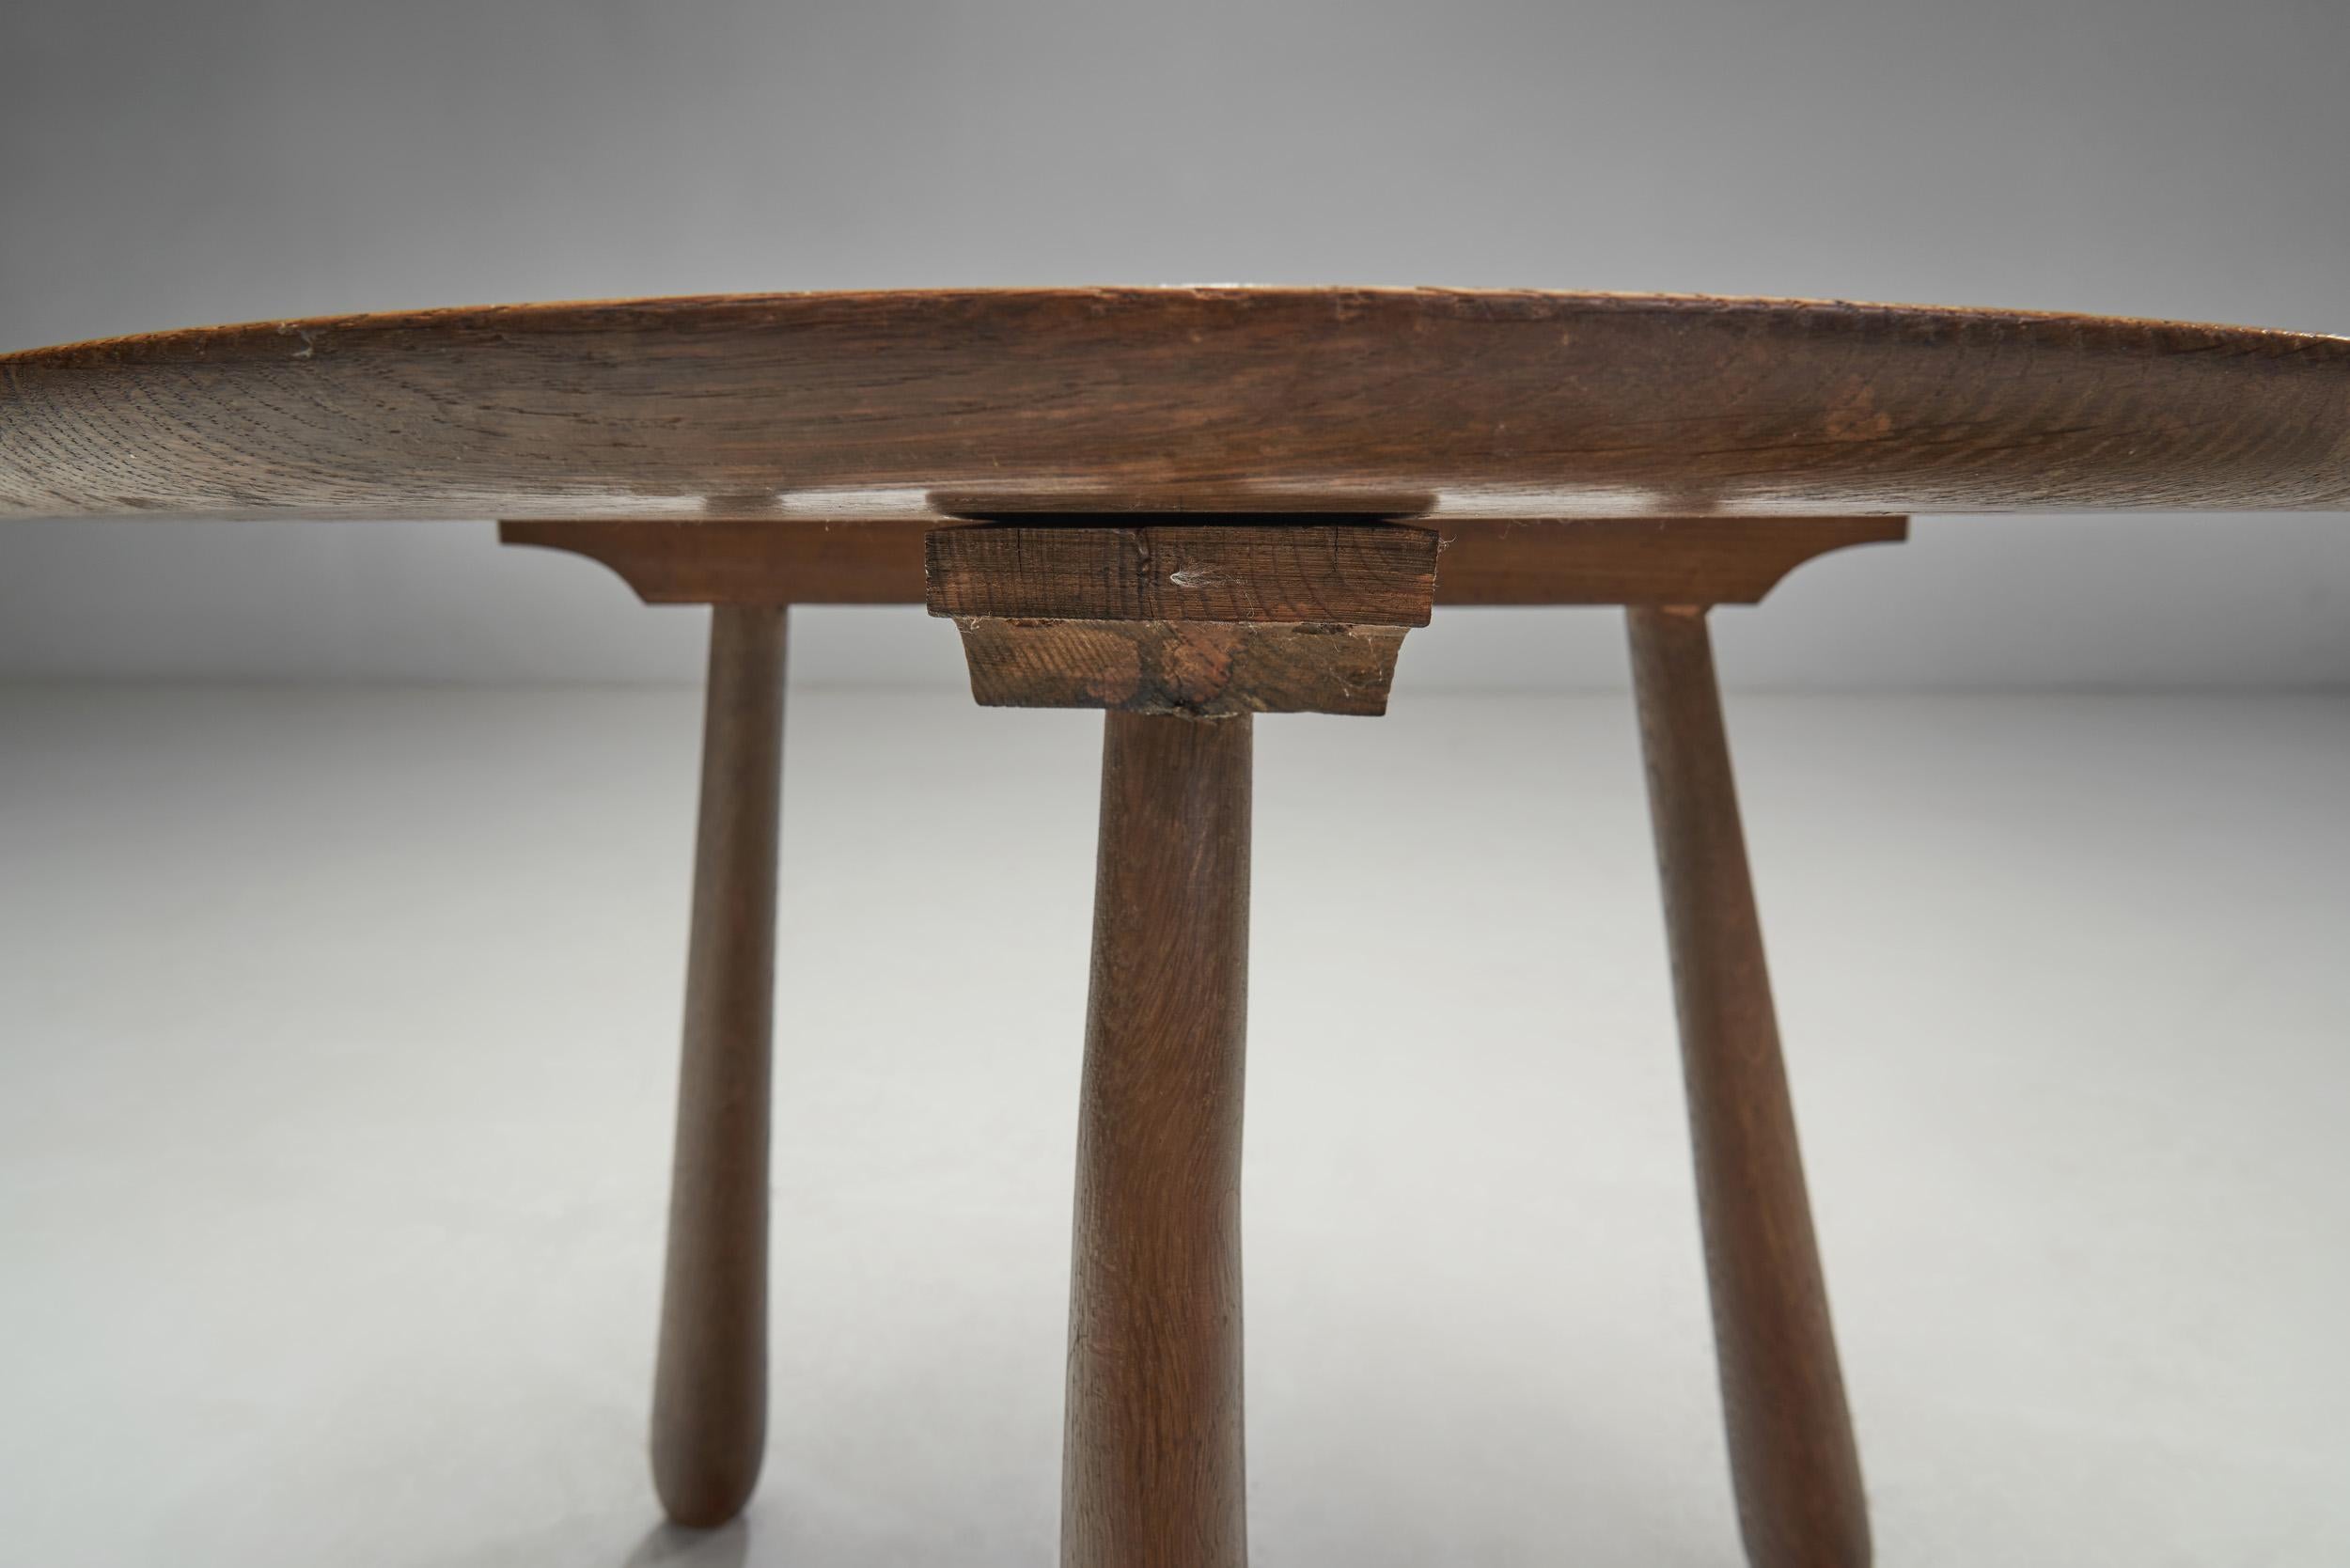 Carved Stained Oak Coffee Table on Tripod Legs, Europe, ca 1940s For Sale 5